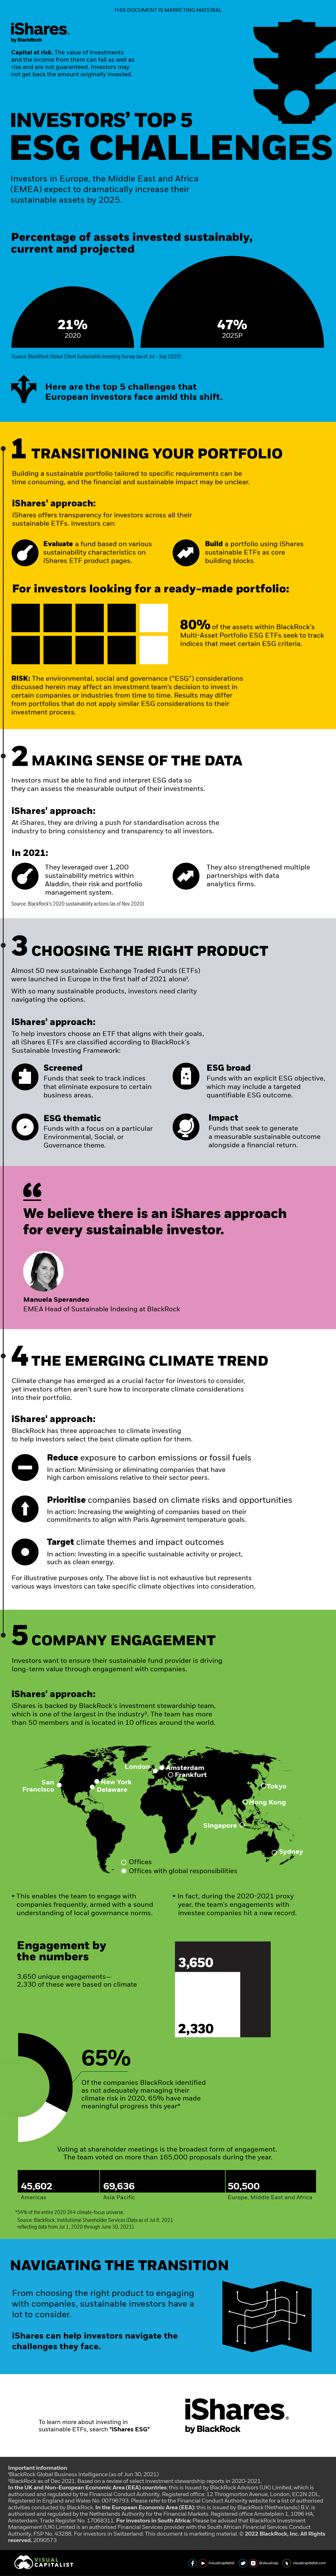 Long-form infographic showing the top ESG challenges investors face: transitioning your portfolio, making sense of the data, choosing the right product, the emerging climate trend, and company engagement.